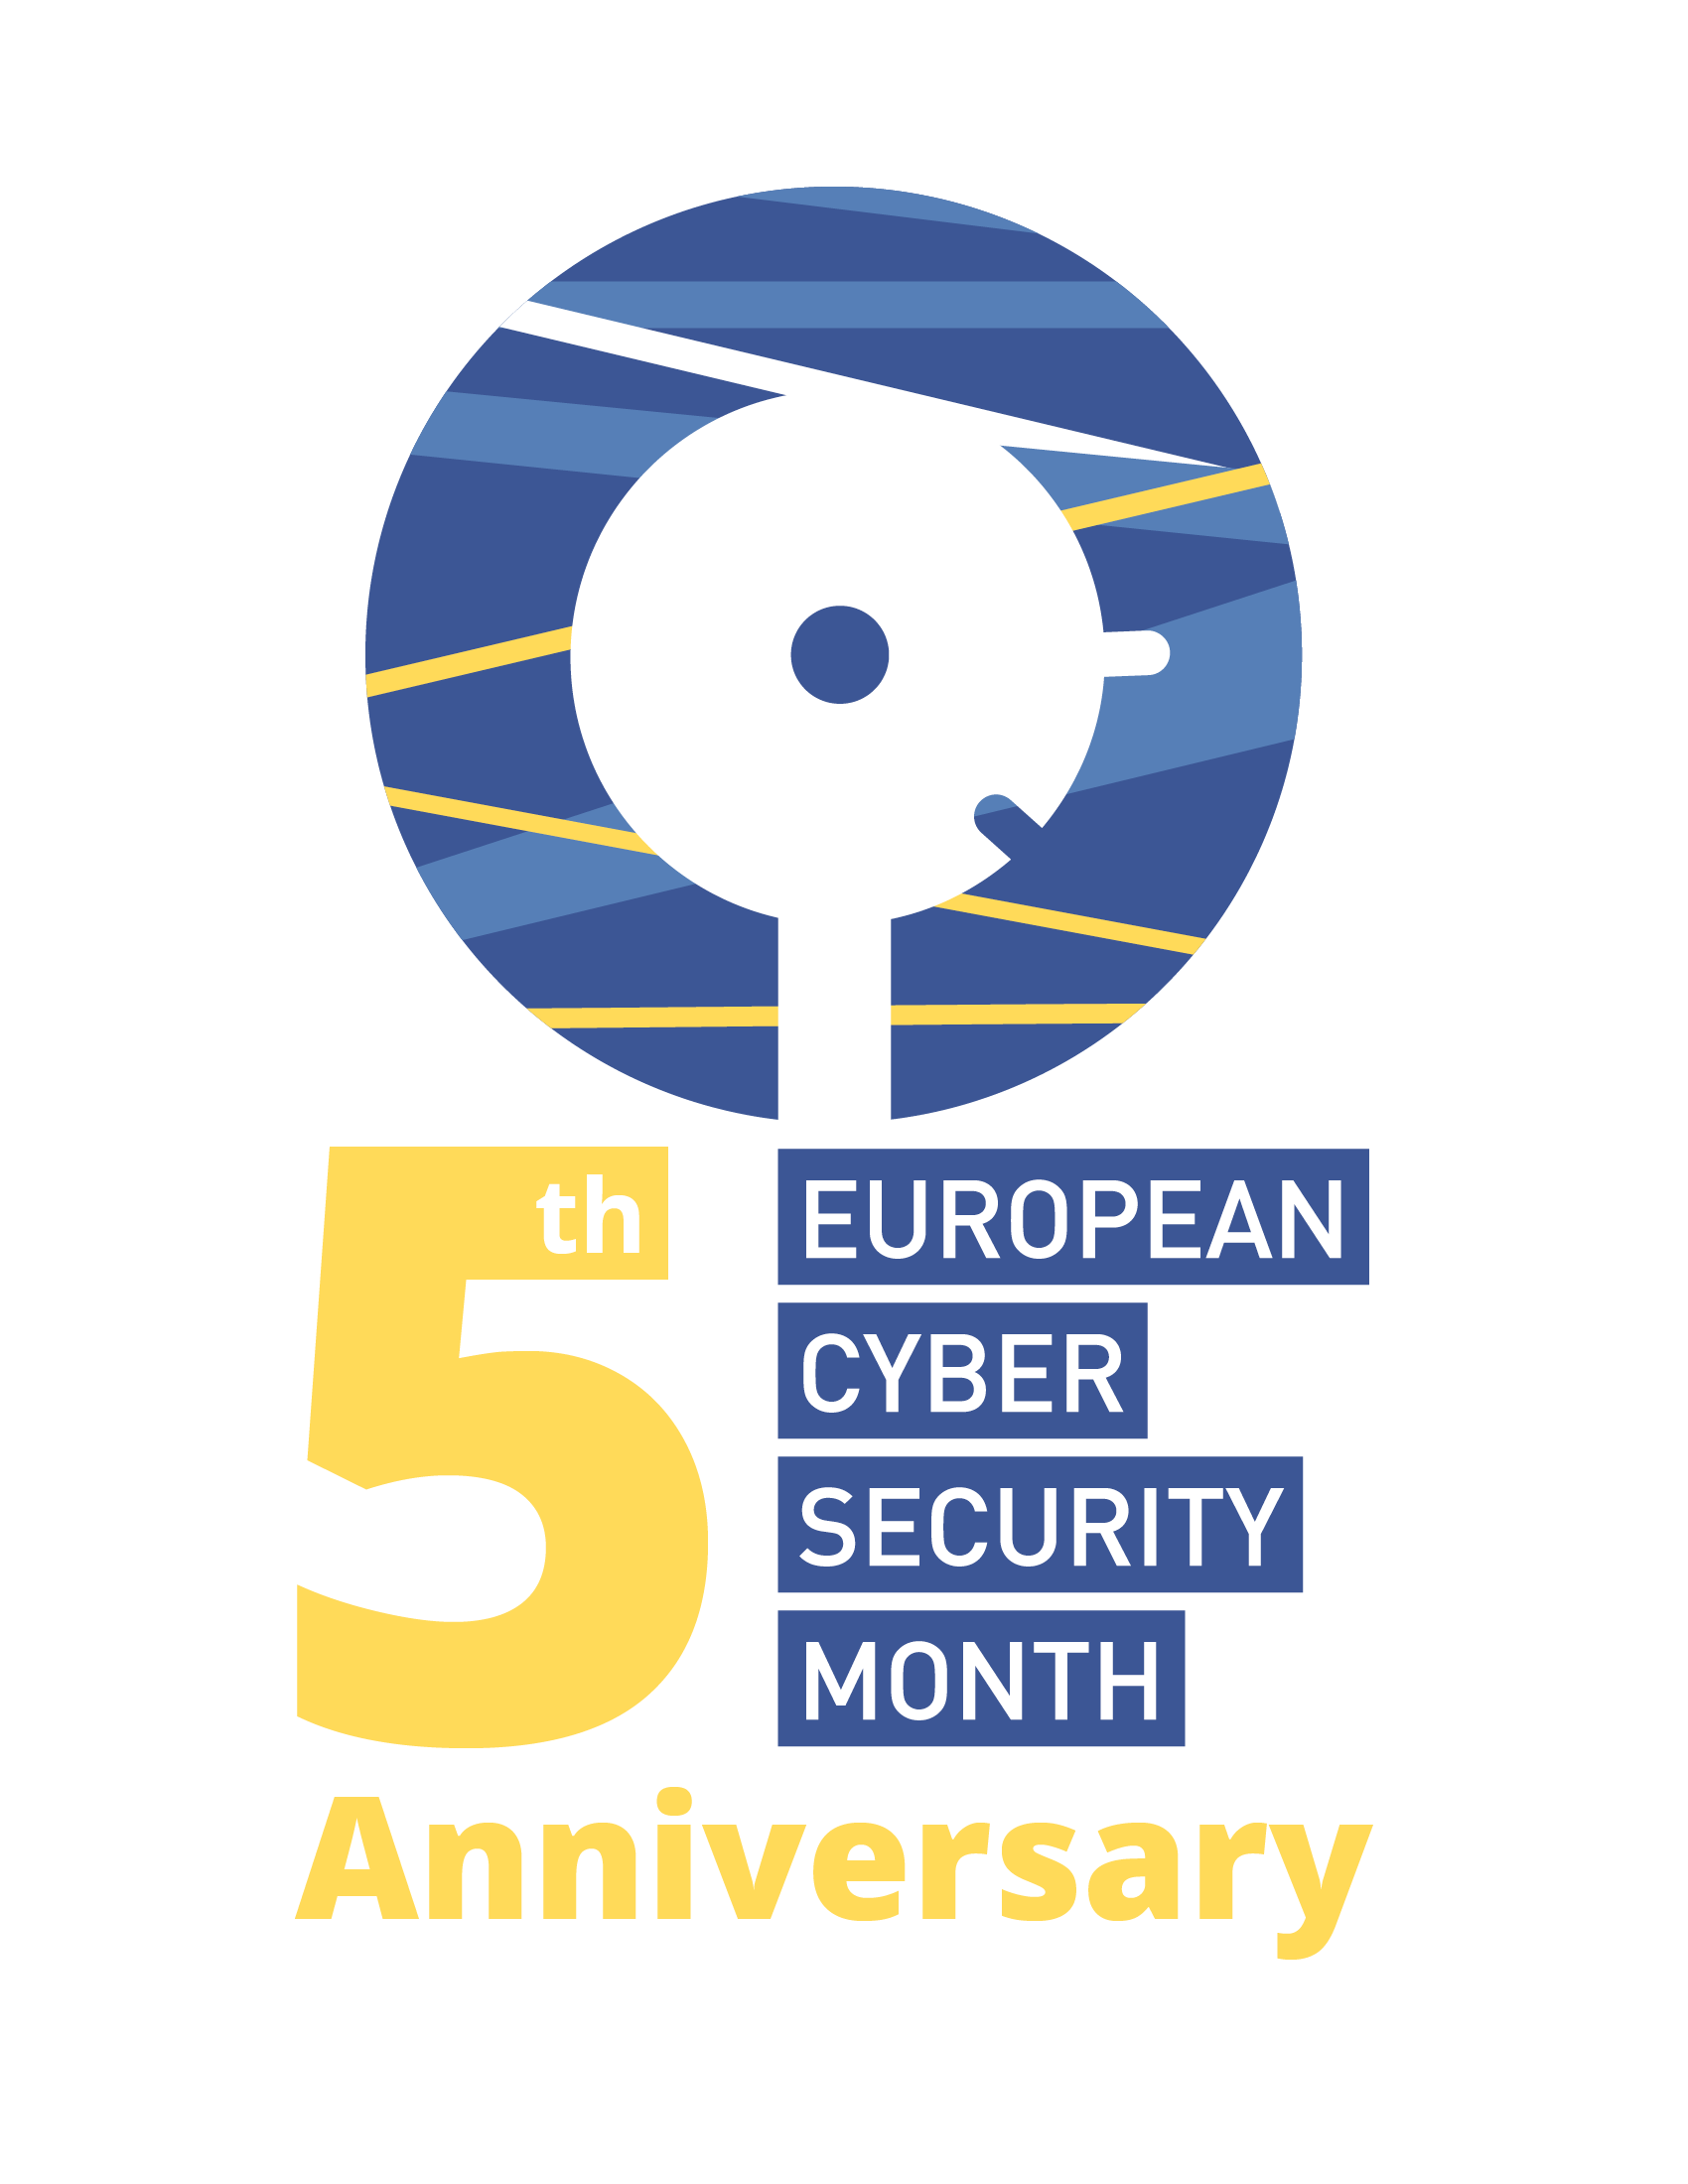 European Cyber Security Month - 5th Anniversary